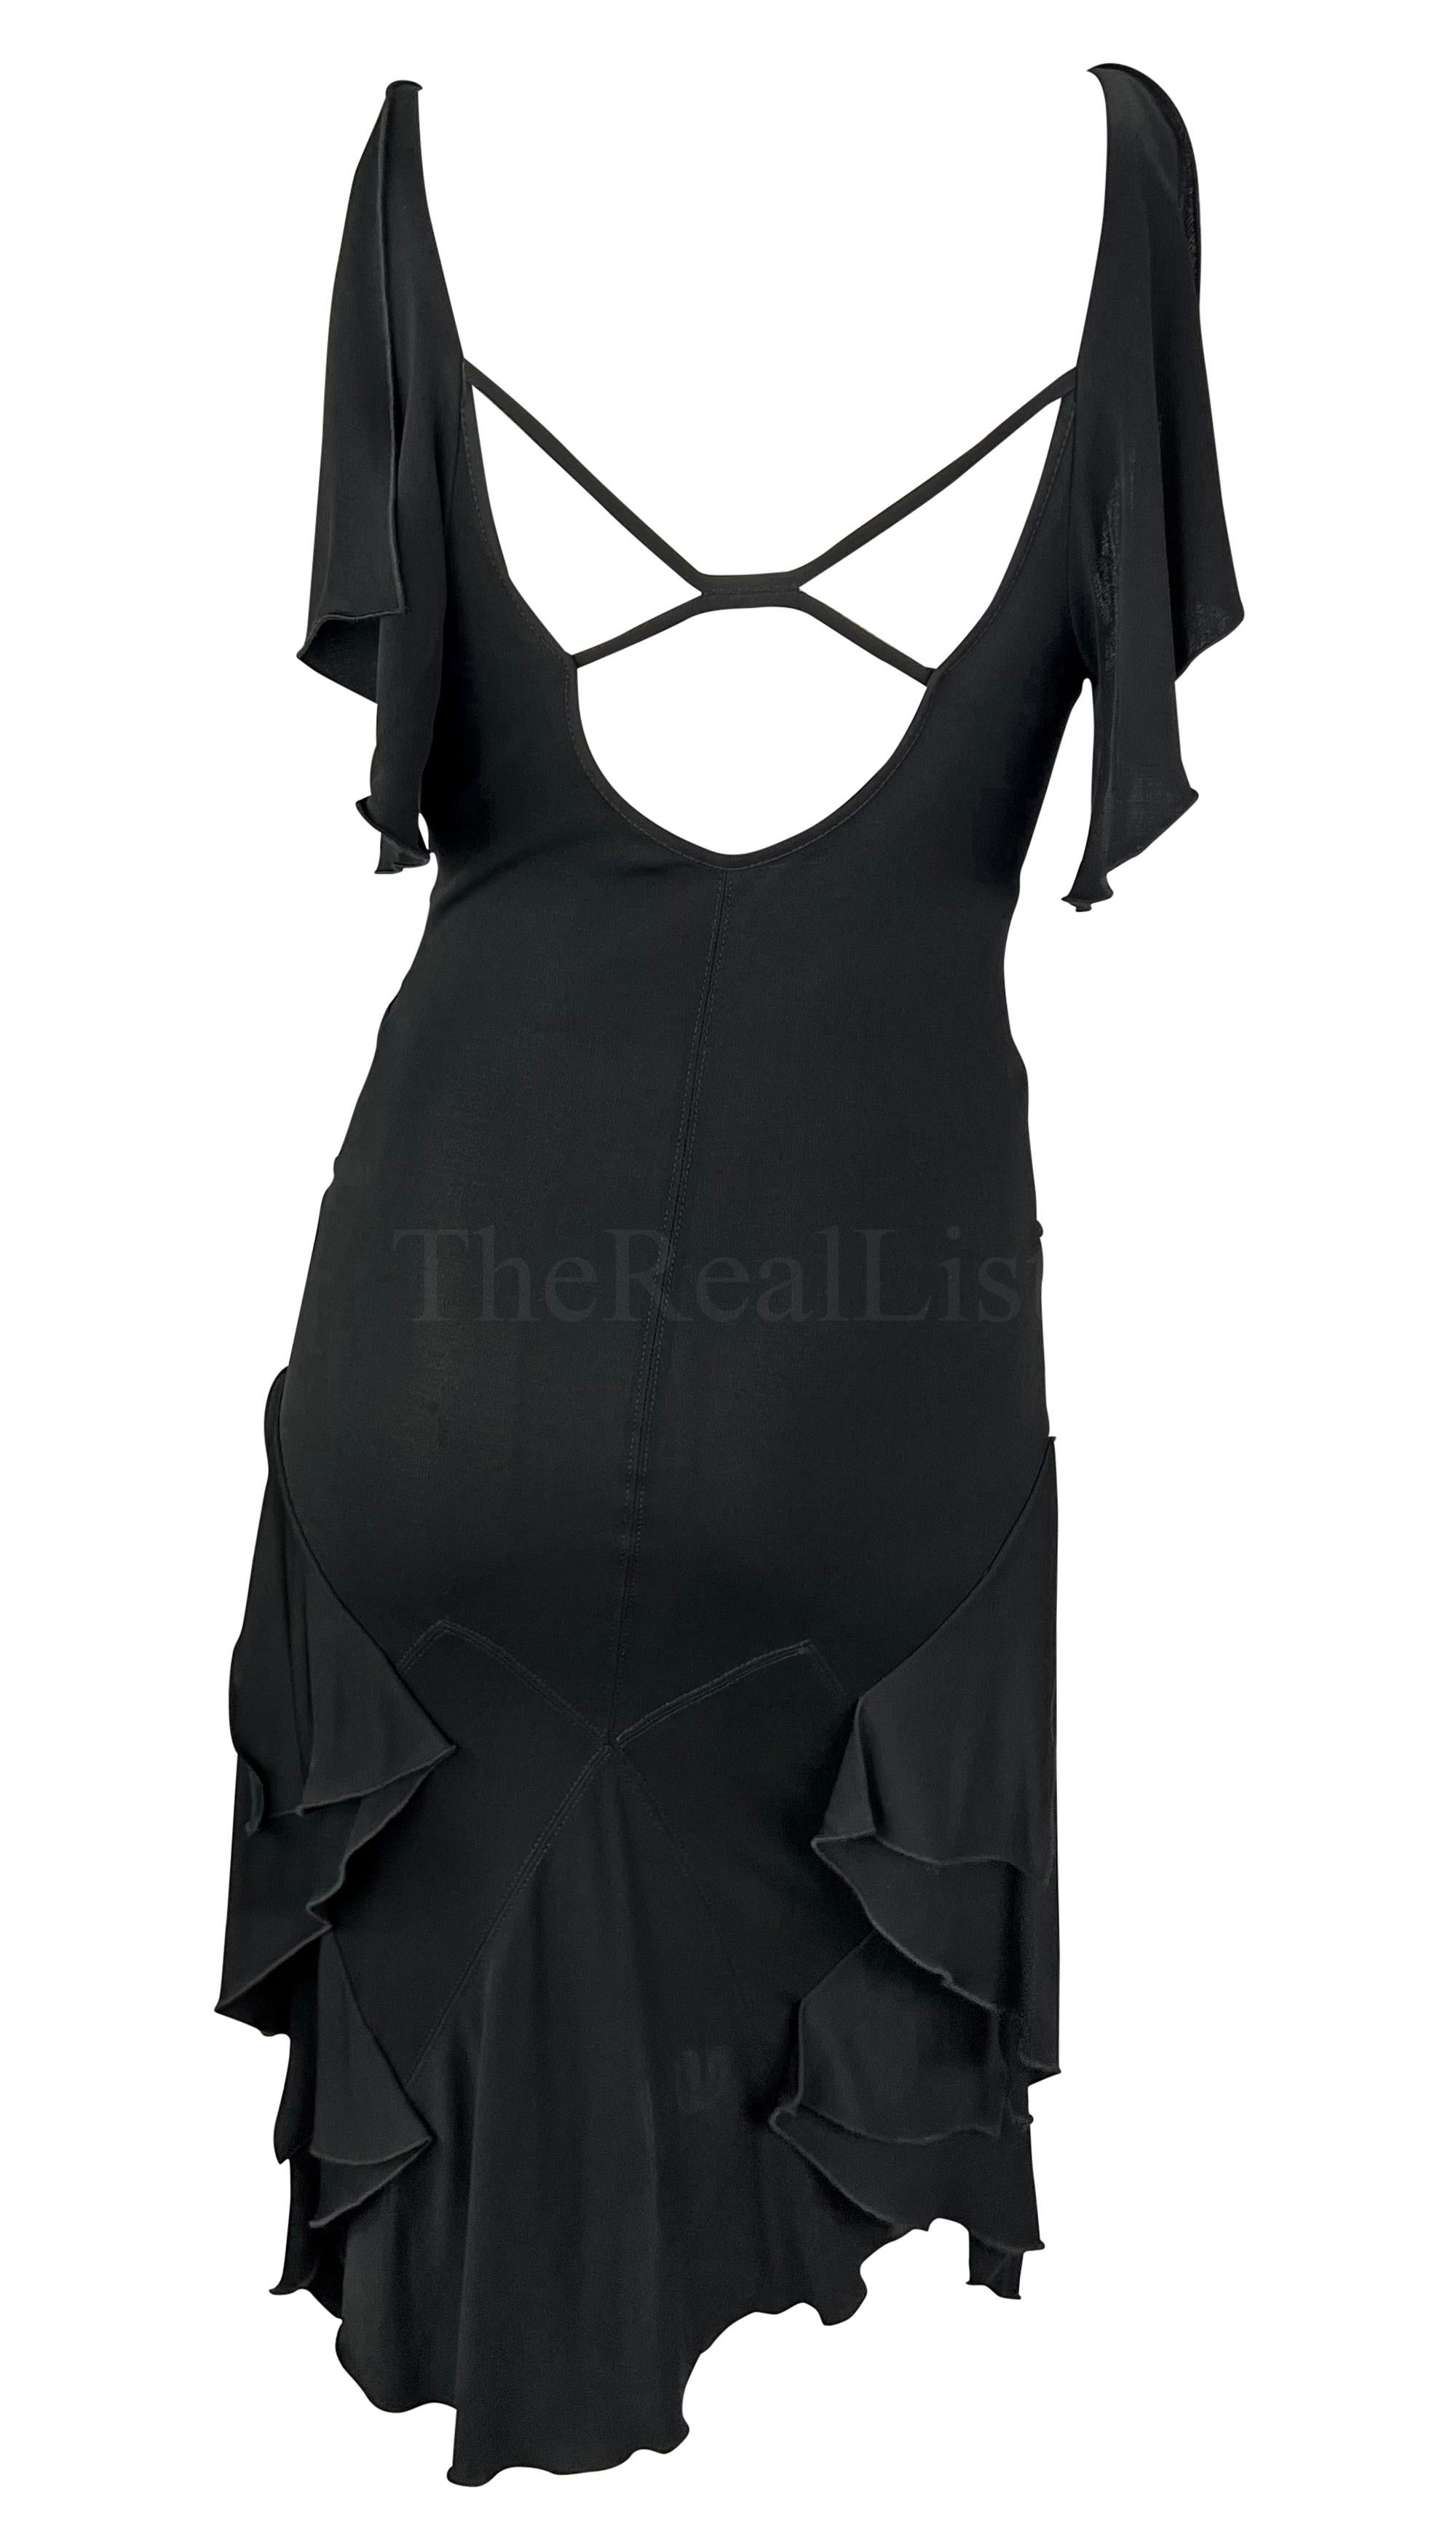 2003 Gucci by Tom Ford Black Plunge Ruffle Dress Sleeveless For Sale 1